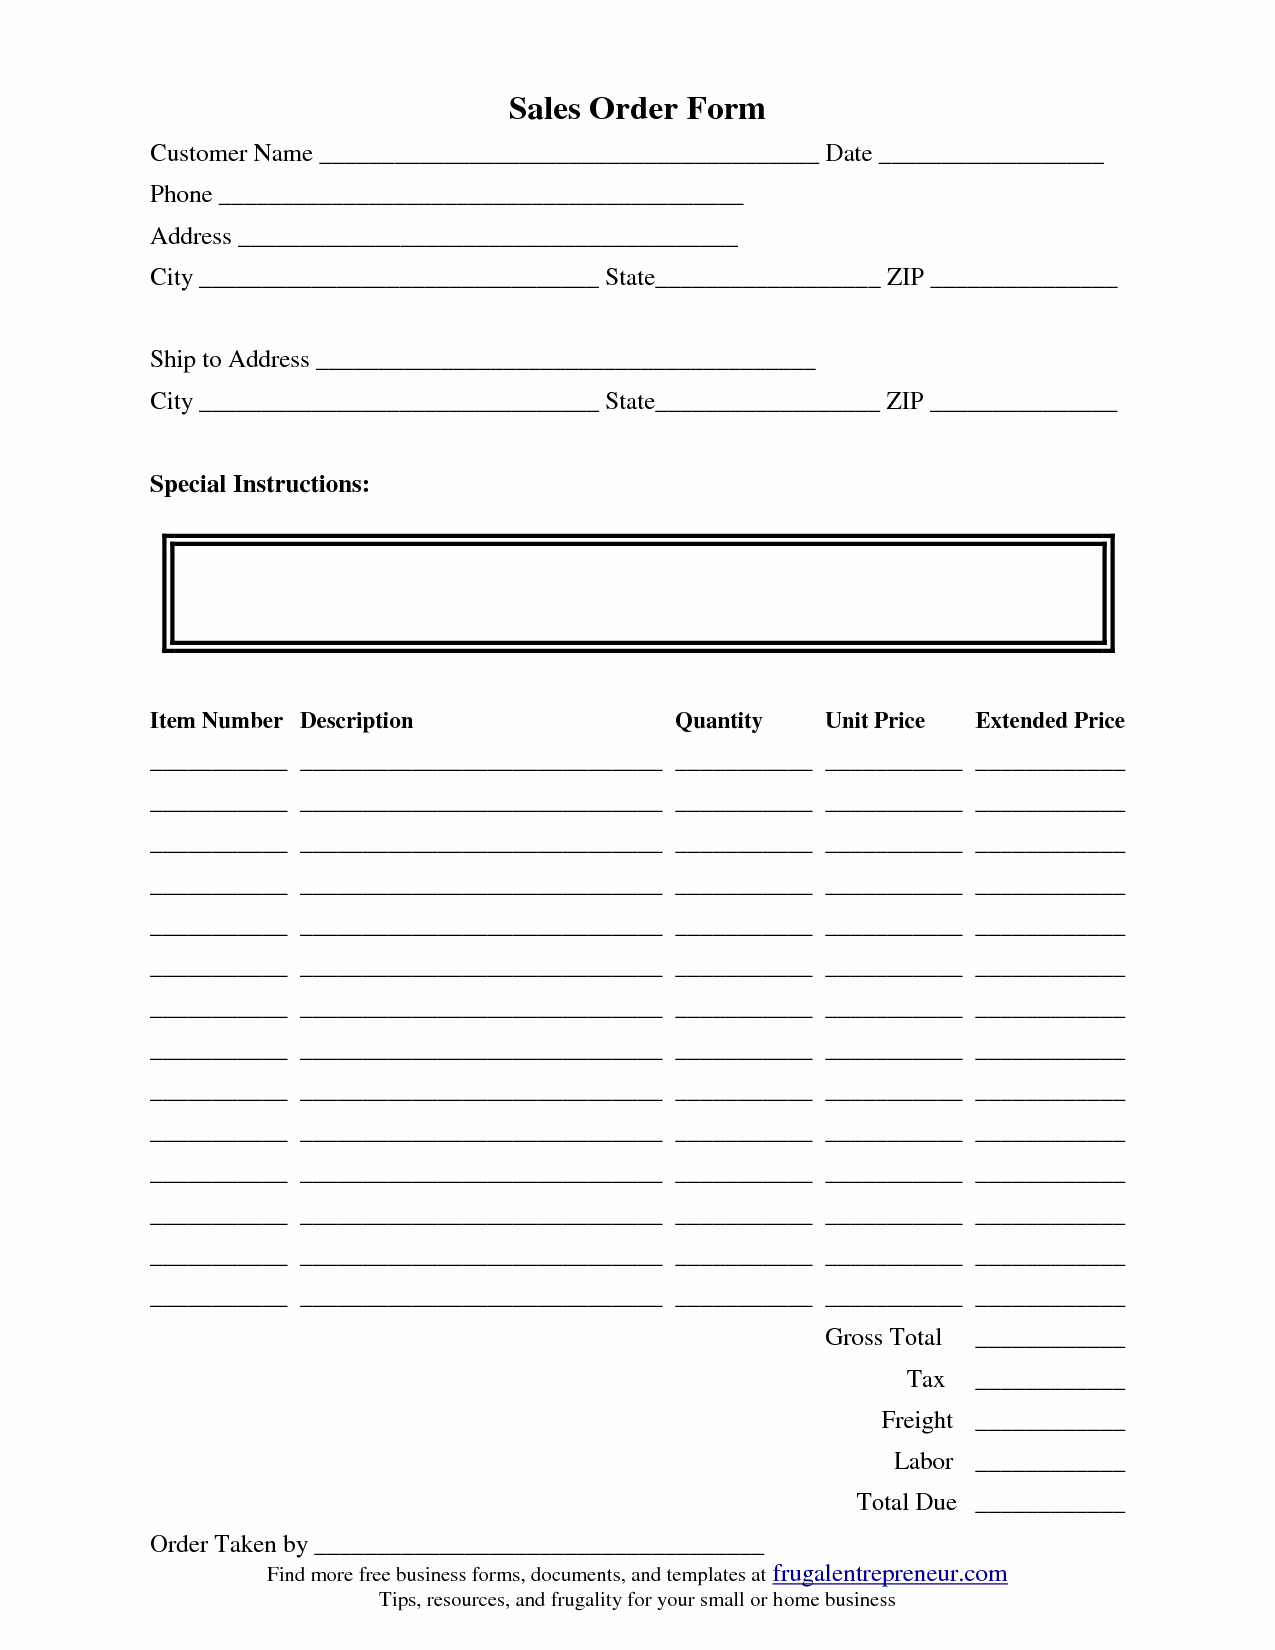 Sales order form Templates Free Lovely order form Template